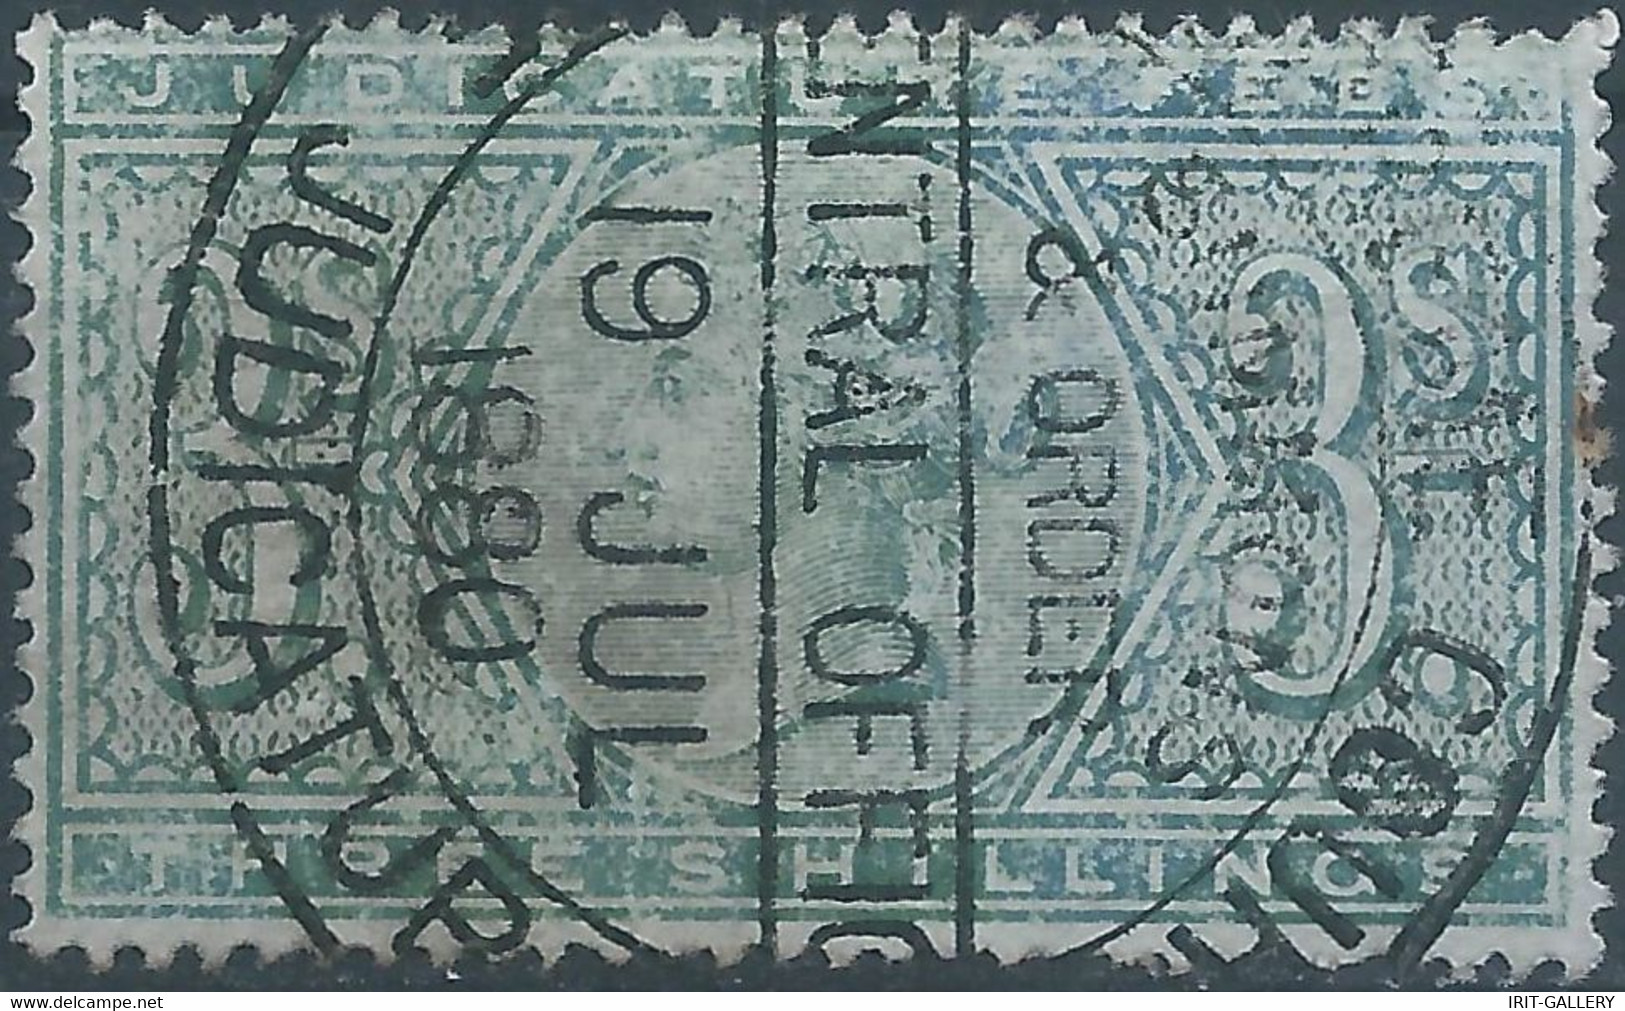 Great Britain-ENGLAND,Queen Victoria,1880 Revenue Stamp Tax Fiscal,JUDICATURE FEES, 3 Shillings,Used - Fiscaux